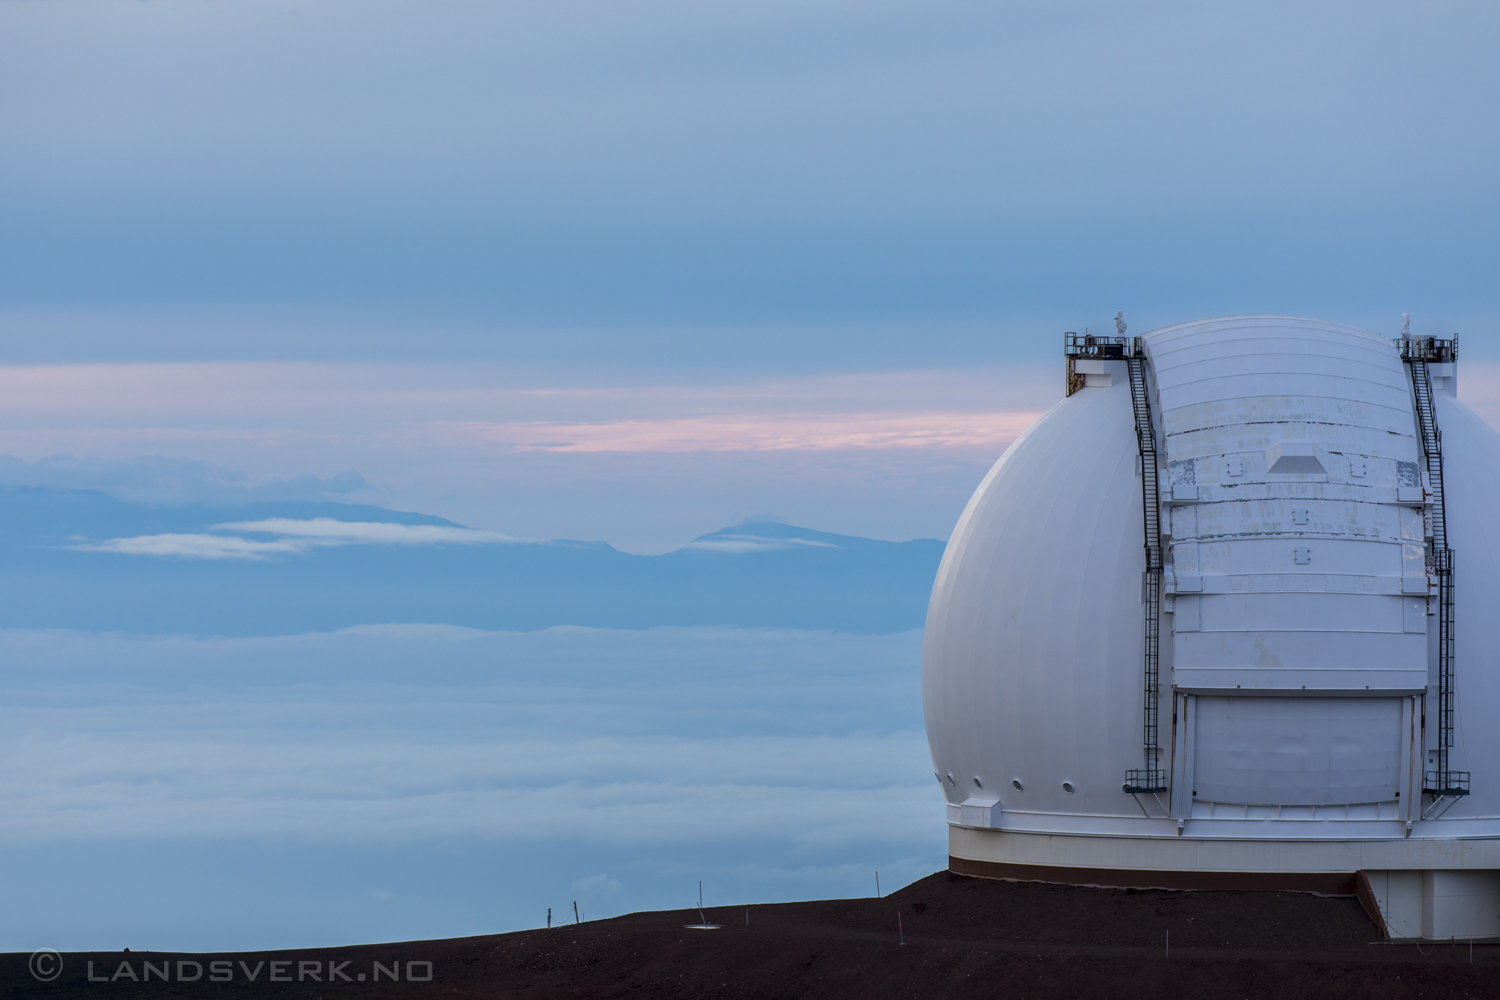 The view from the top of Mauna Kea with Maui in the background. Big Island, Hawaii. 

(Canon EOS 5D Mark IV / Canon EF 100-400mm f/4.5-5.6 L IS II USM)